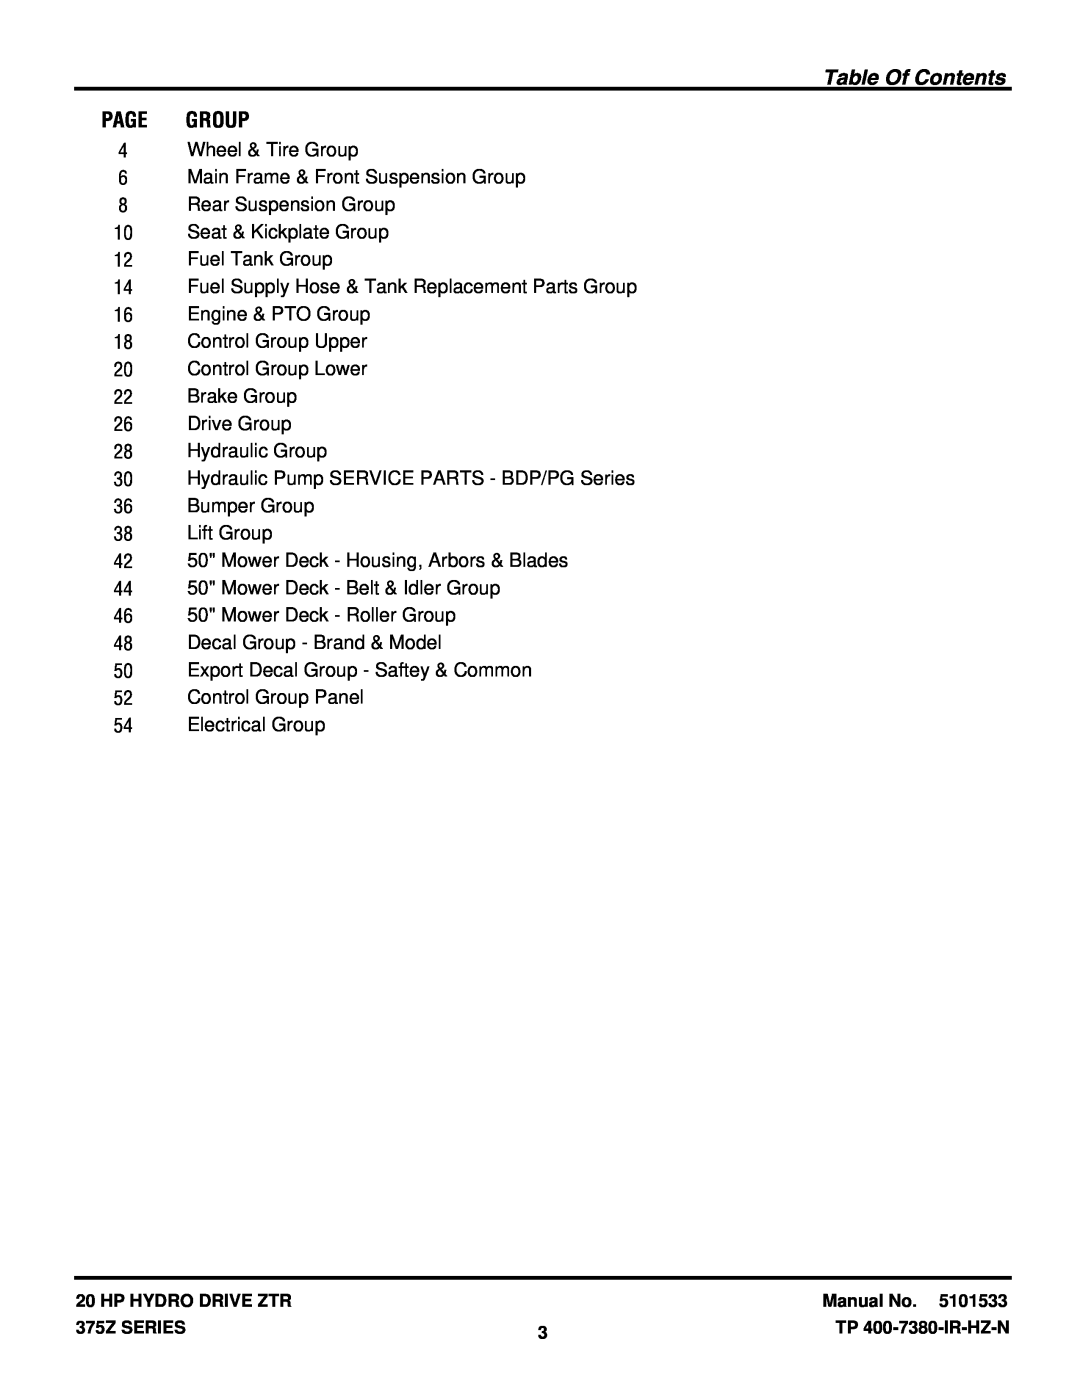 Snapper 375Z manual Table Of Contents, Page Group 